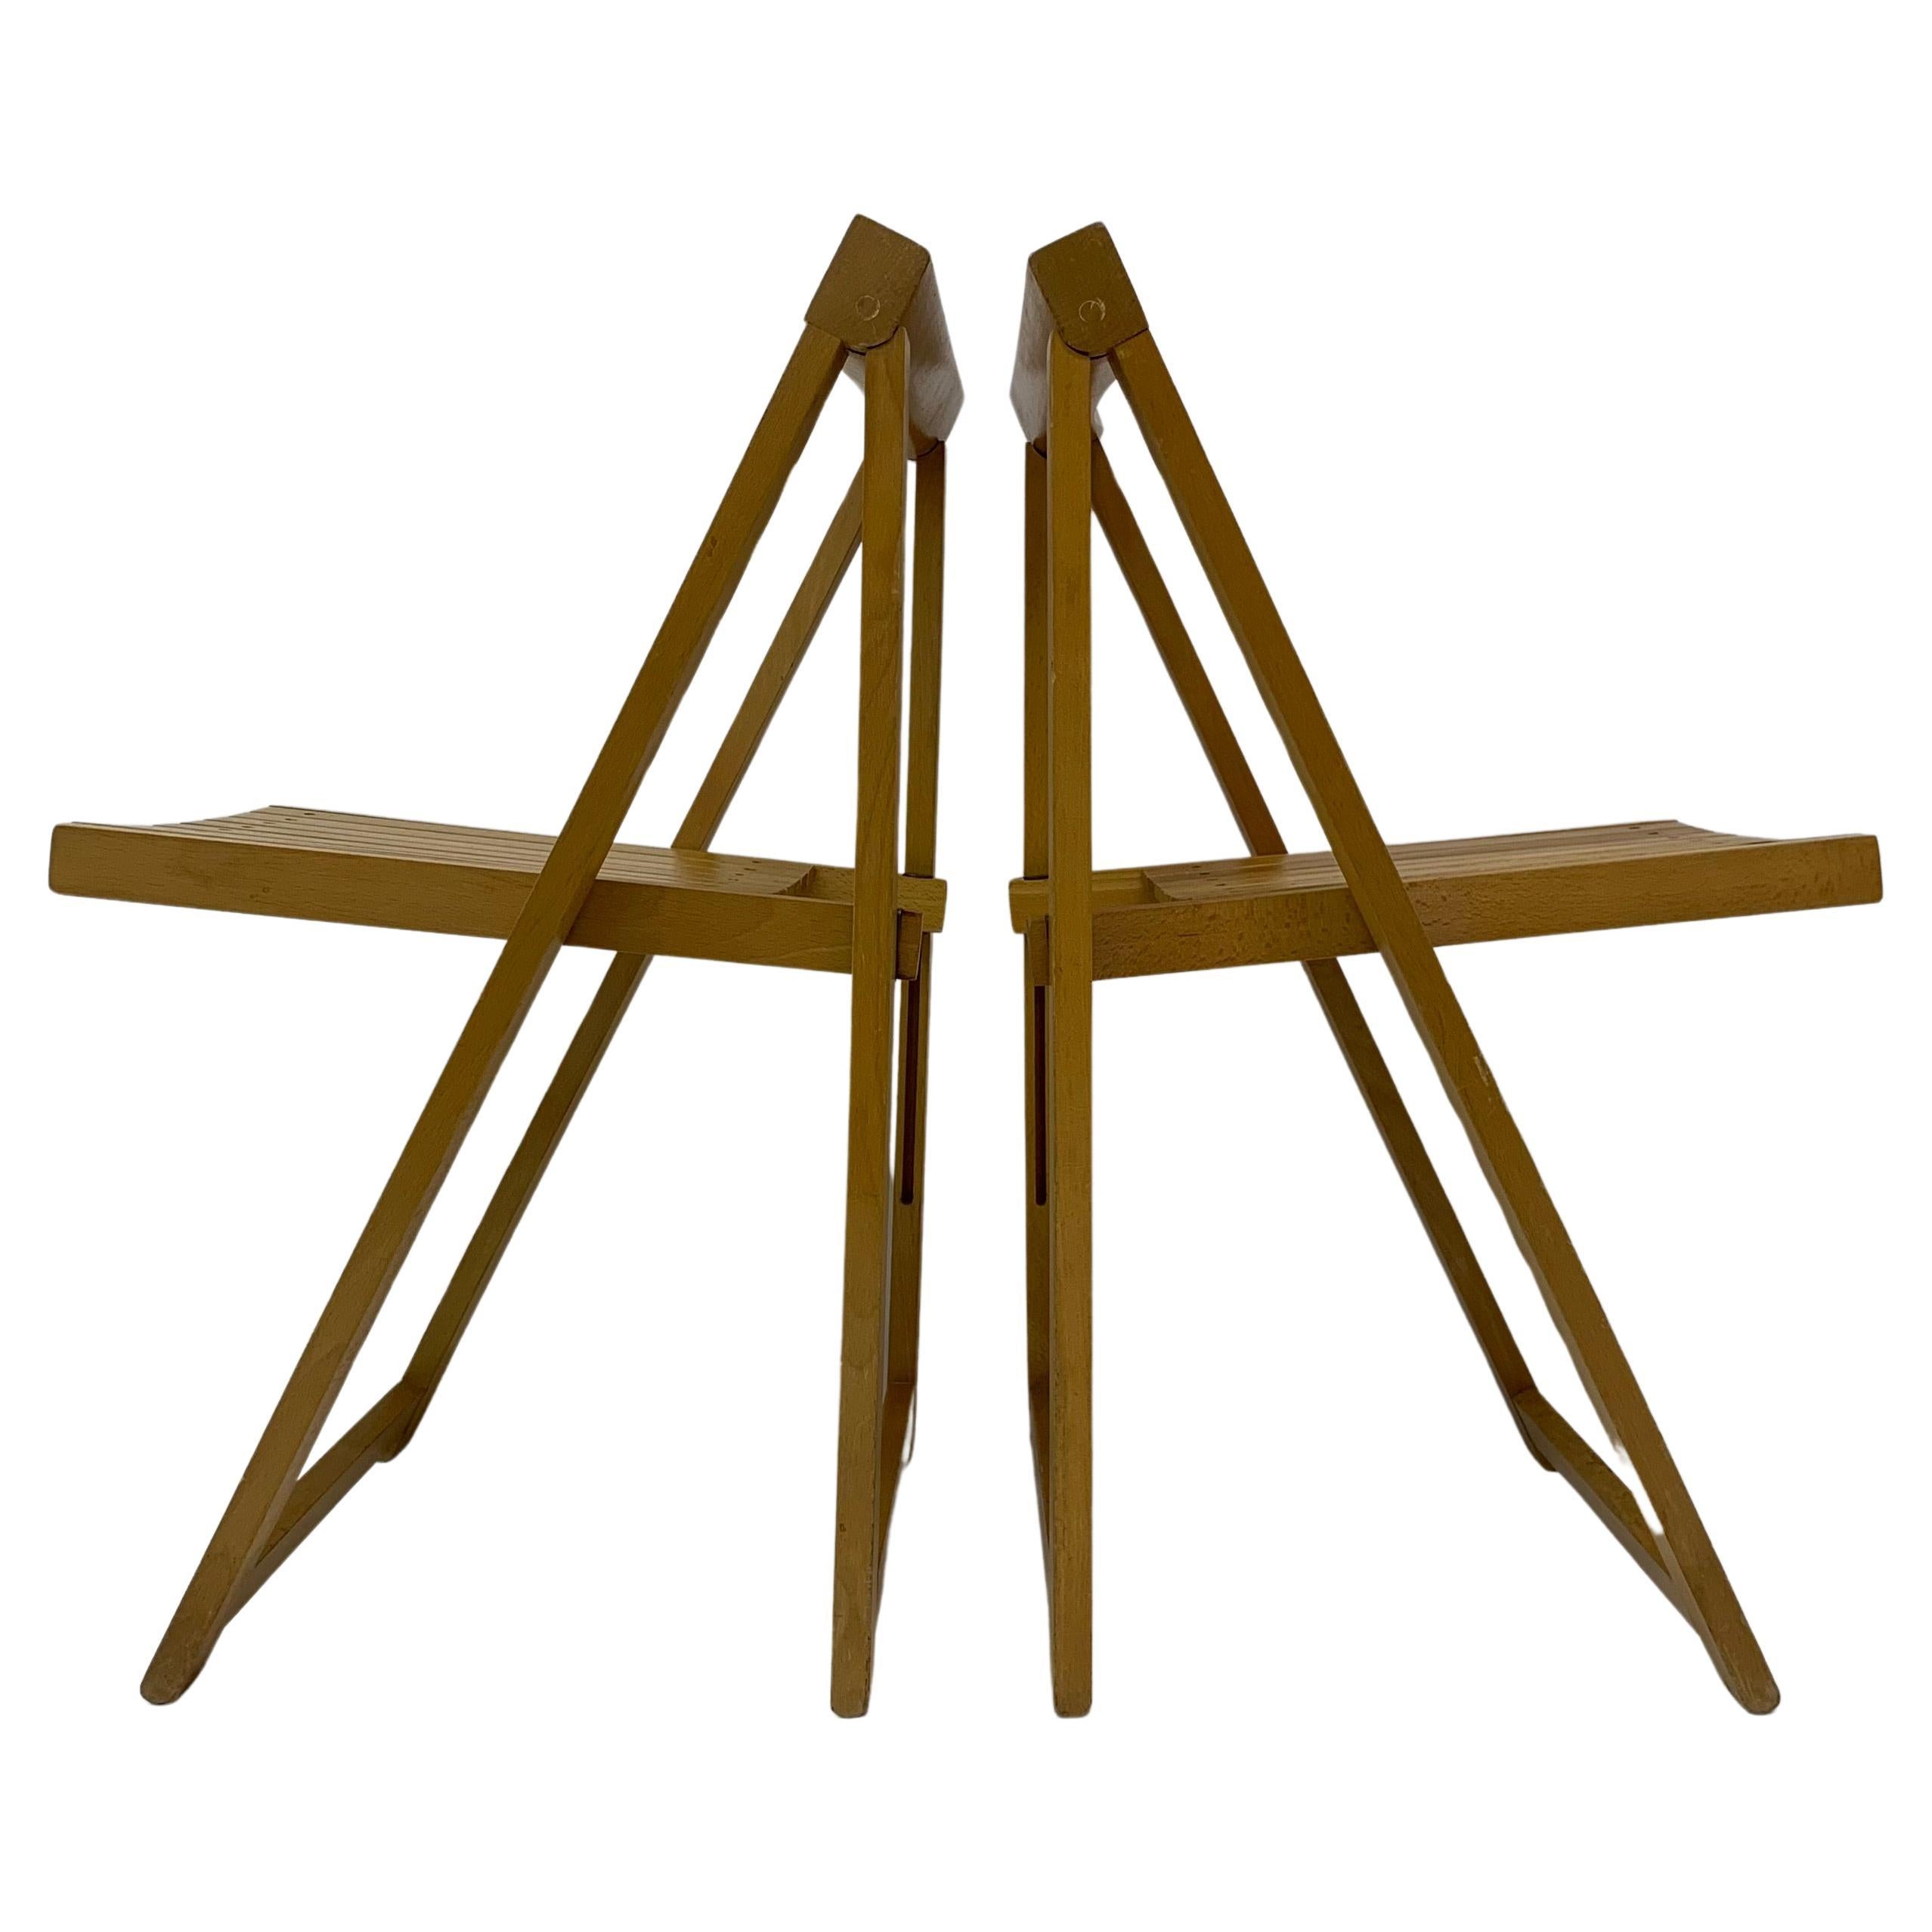 Set of 2 Aldo Jacober for Alberto Bazzani folding chairs, 1960’s For Sale